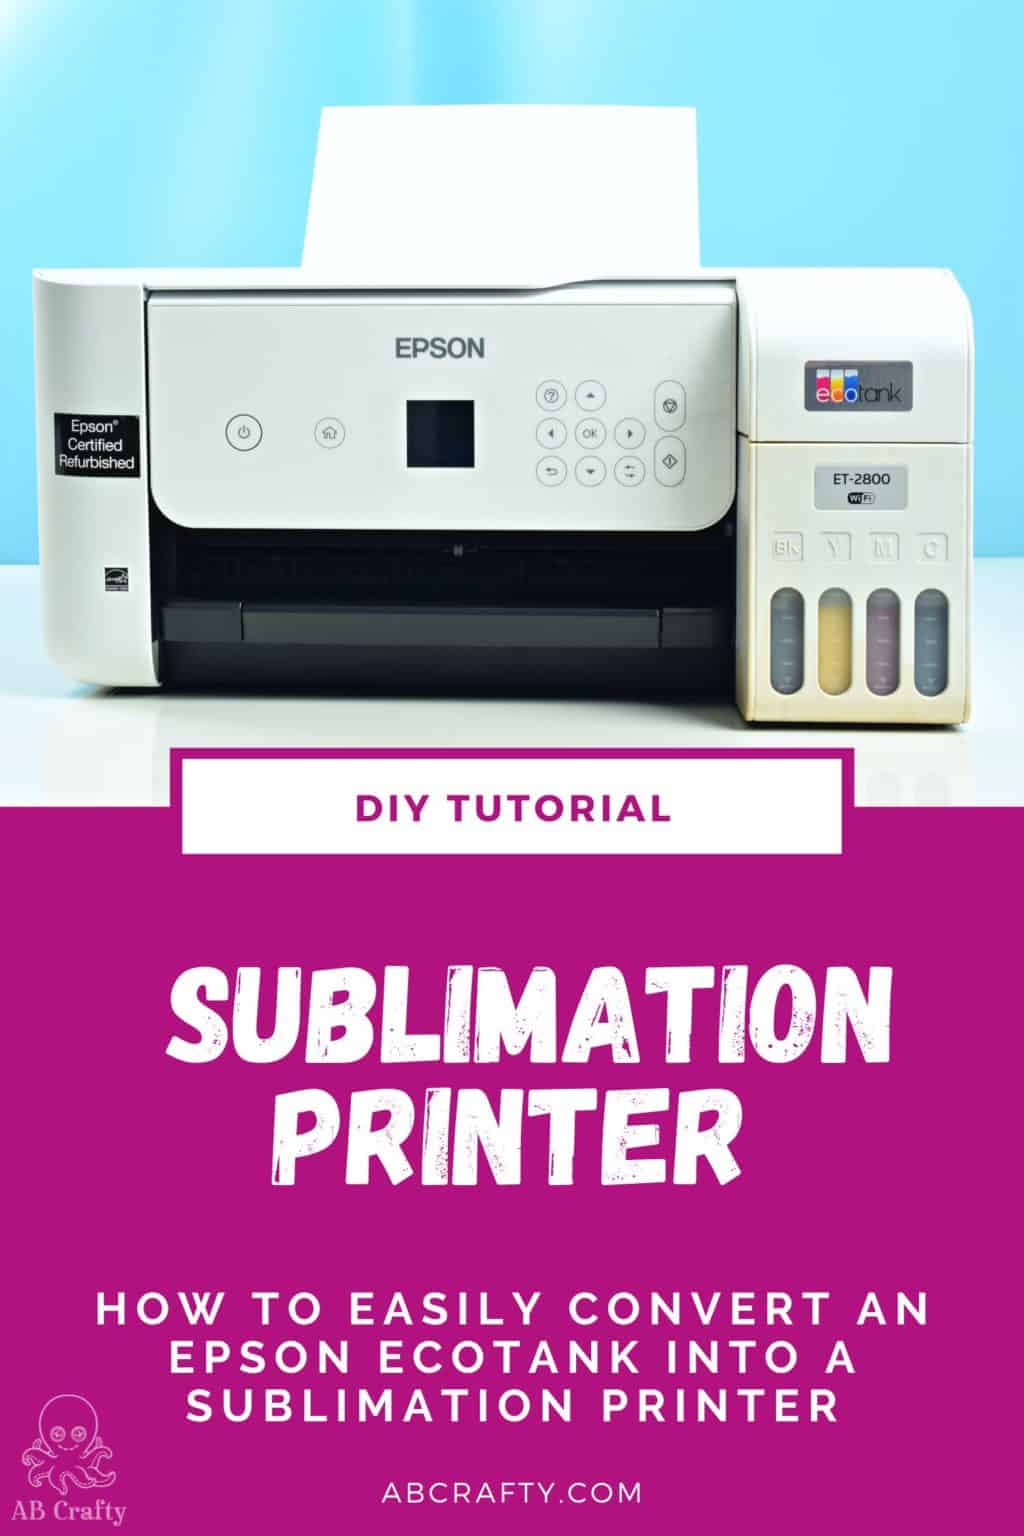 epson ecotank printer filled with sublimation ink and sublimation paper with the title "DIY tutorial - sublimation printer - how to convert an epson ecotank into a sublimation printer, abcrafty.com"